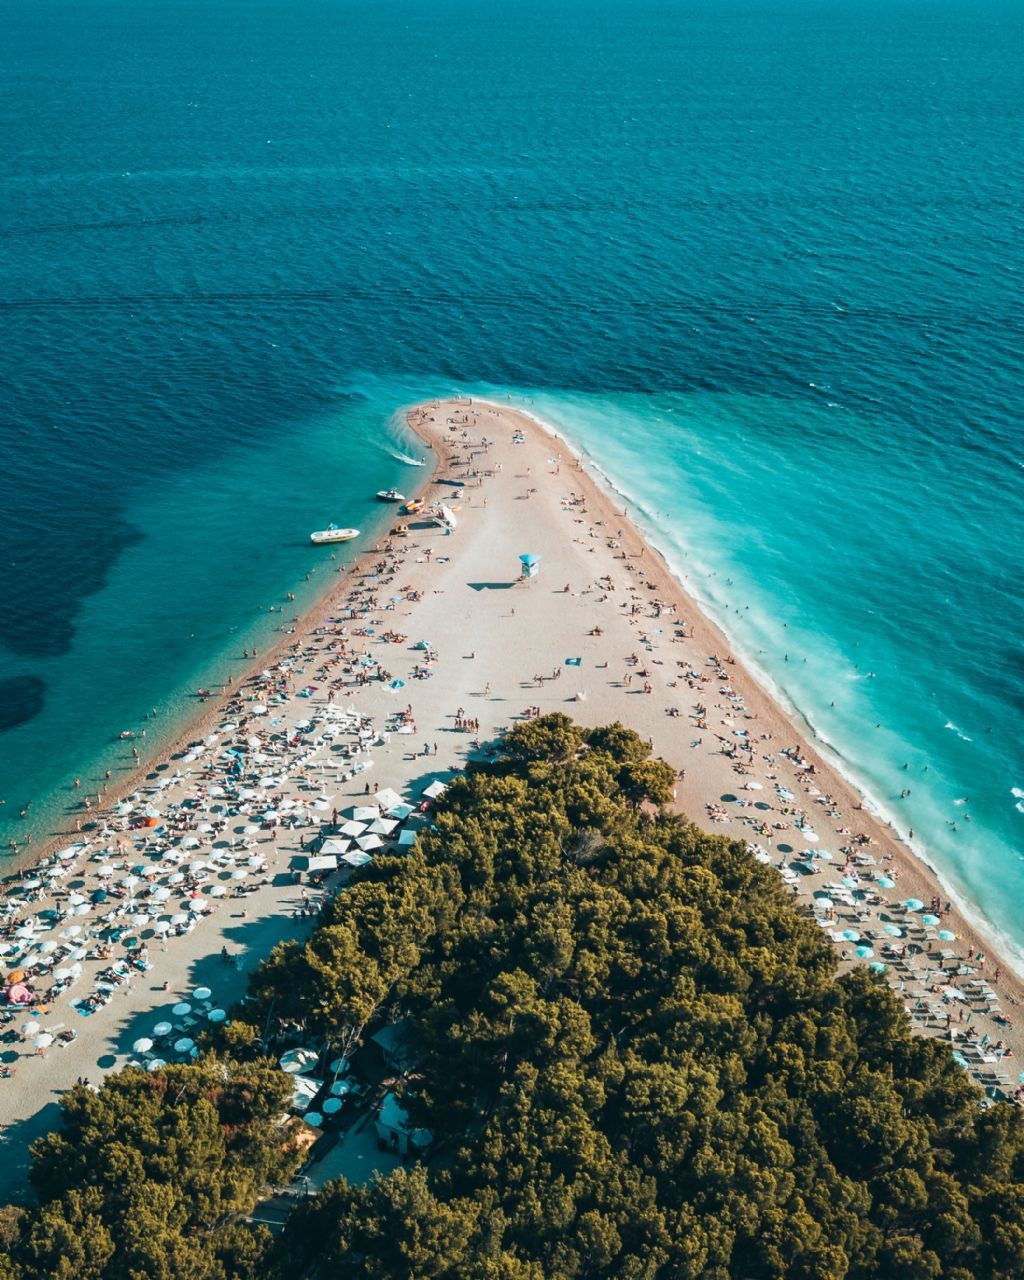 Croatia is famous for its stunning beaches